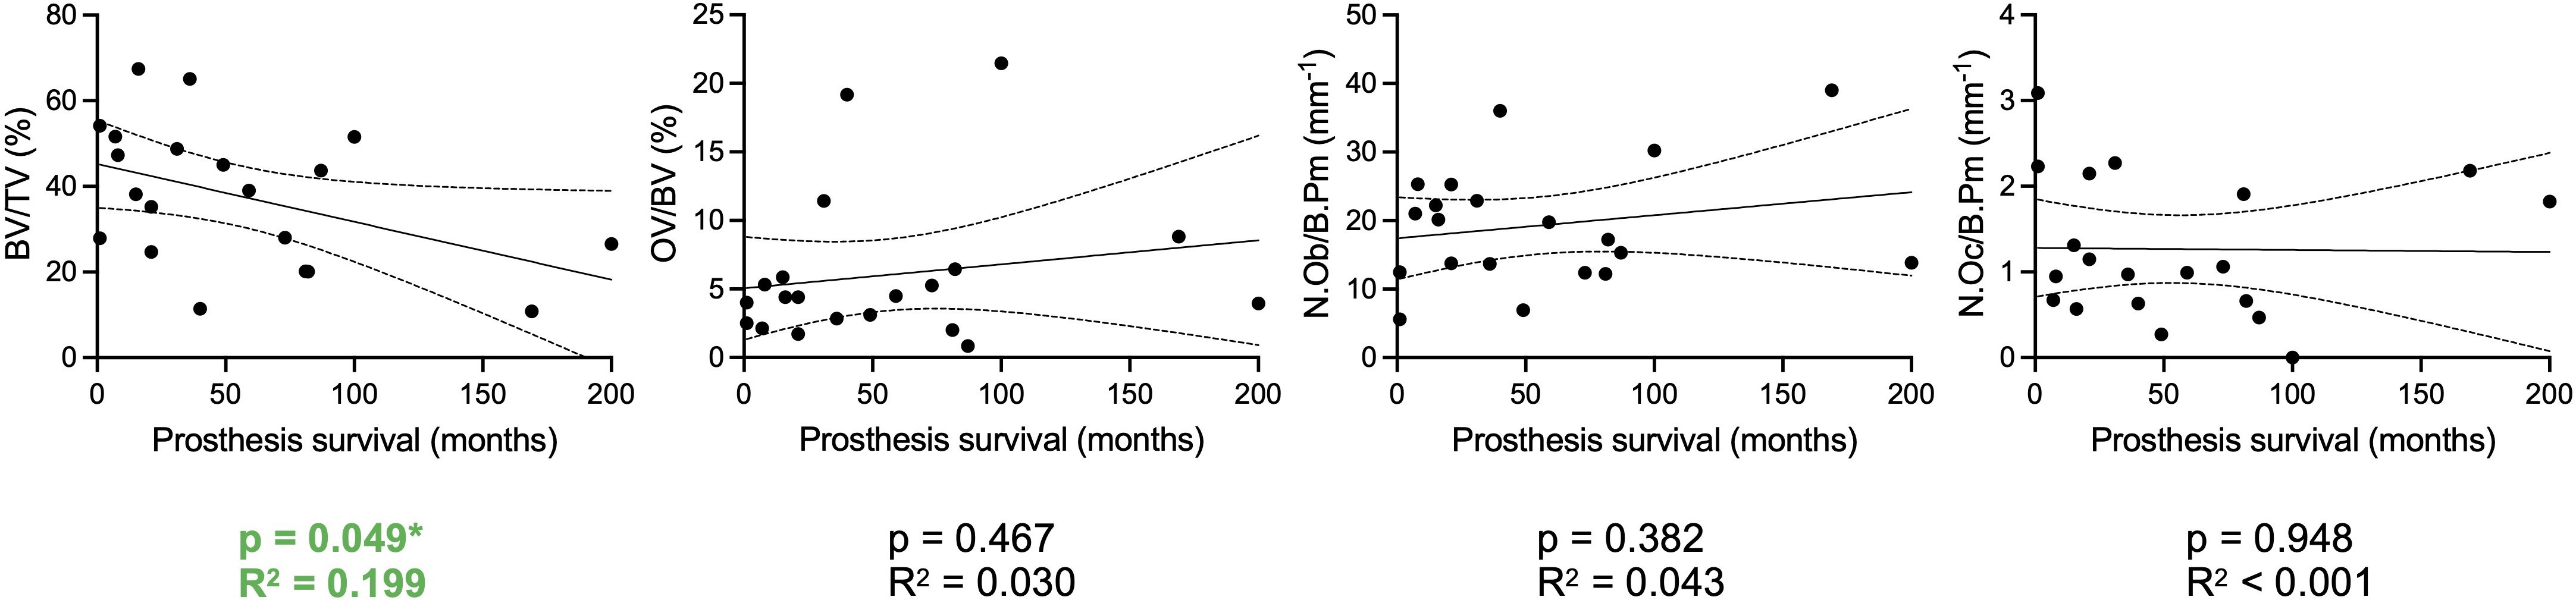 Fig. 3 
            Associations between prosthesis survival and histological, periprosthetic bone tissue parameters in the periprosthetic joint infection group. Linear regression analysis between prosthesis survival in months and skeletal parameters (bone volume per tissue volume (BV/TV), osteoid volume per bone volume (OV/BV), number of osteoblasts per bone perimeter (N.Ob/B.Pm), number of osteoclasts per bone perimeter (N.Oc/B.Pm)) (n = 20). Exact p-values and R2 values are displayed.
          